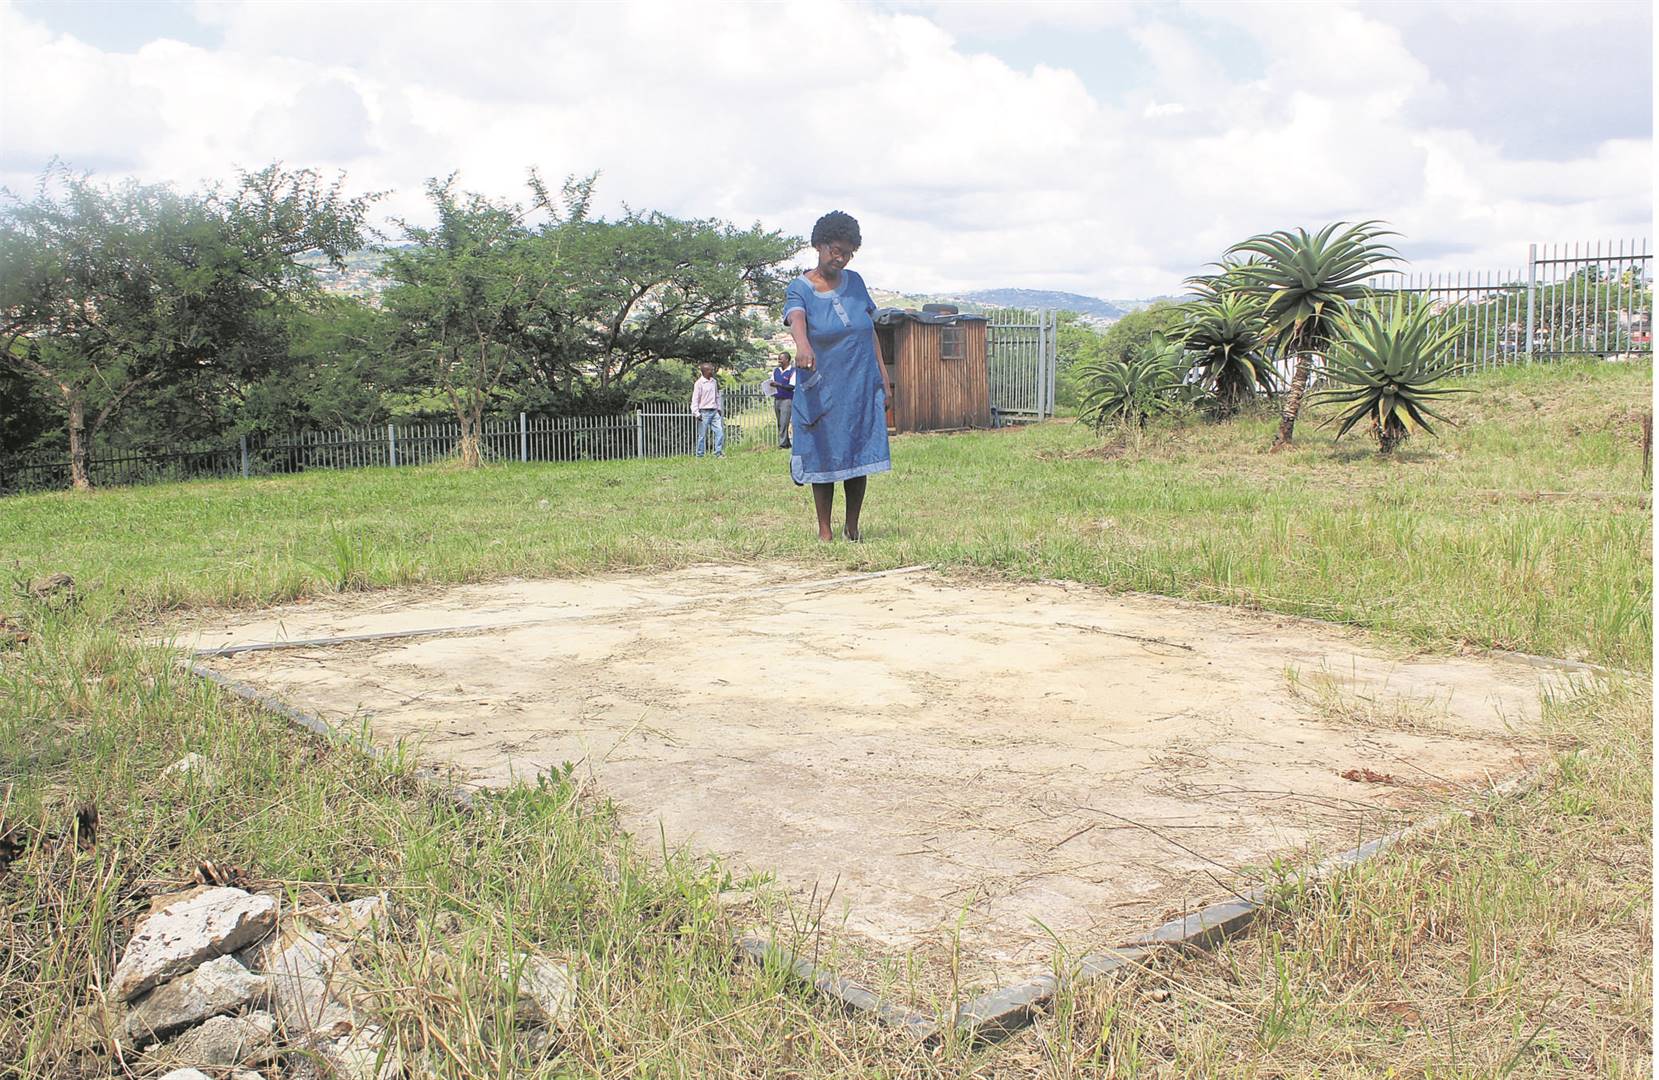 Thuthukile Mabhida shows what remains of her father’s grave at Heroes Acre.Photo by Mawande Dlali